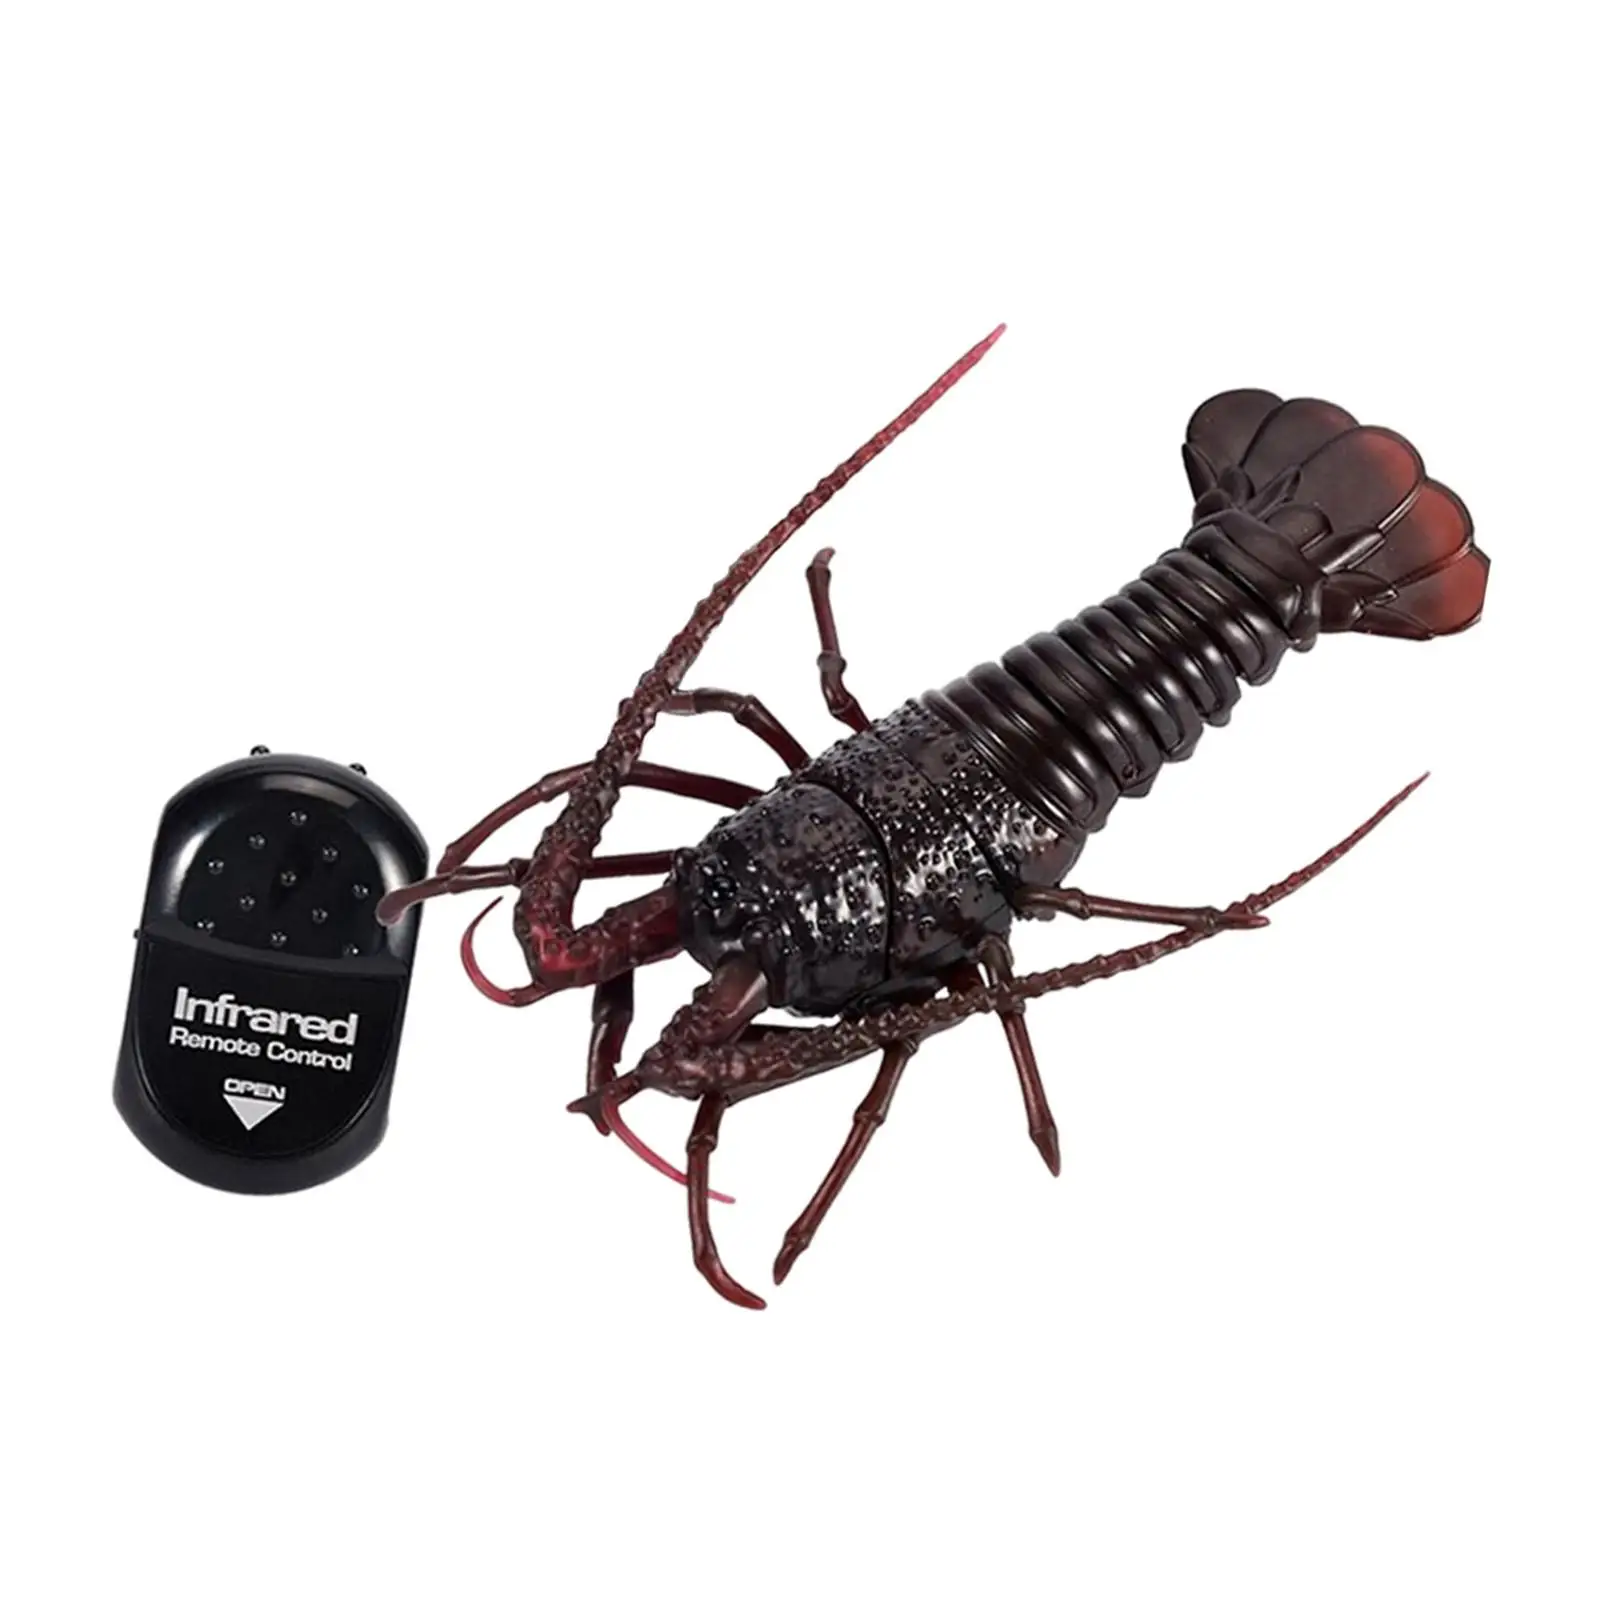 Electric Infrared RC Shrimp Remote Control Crawfish Toy for Girls Boys Gifts